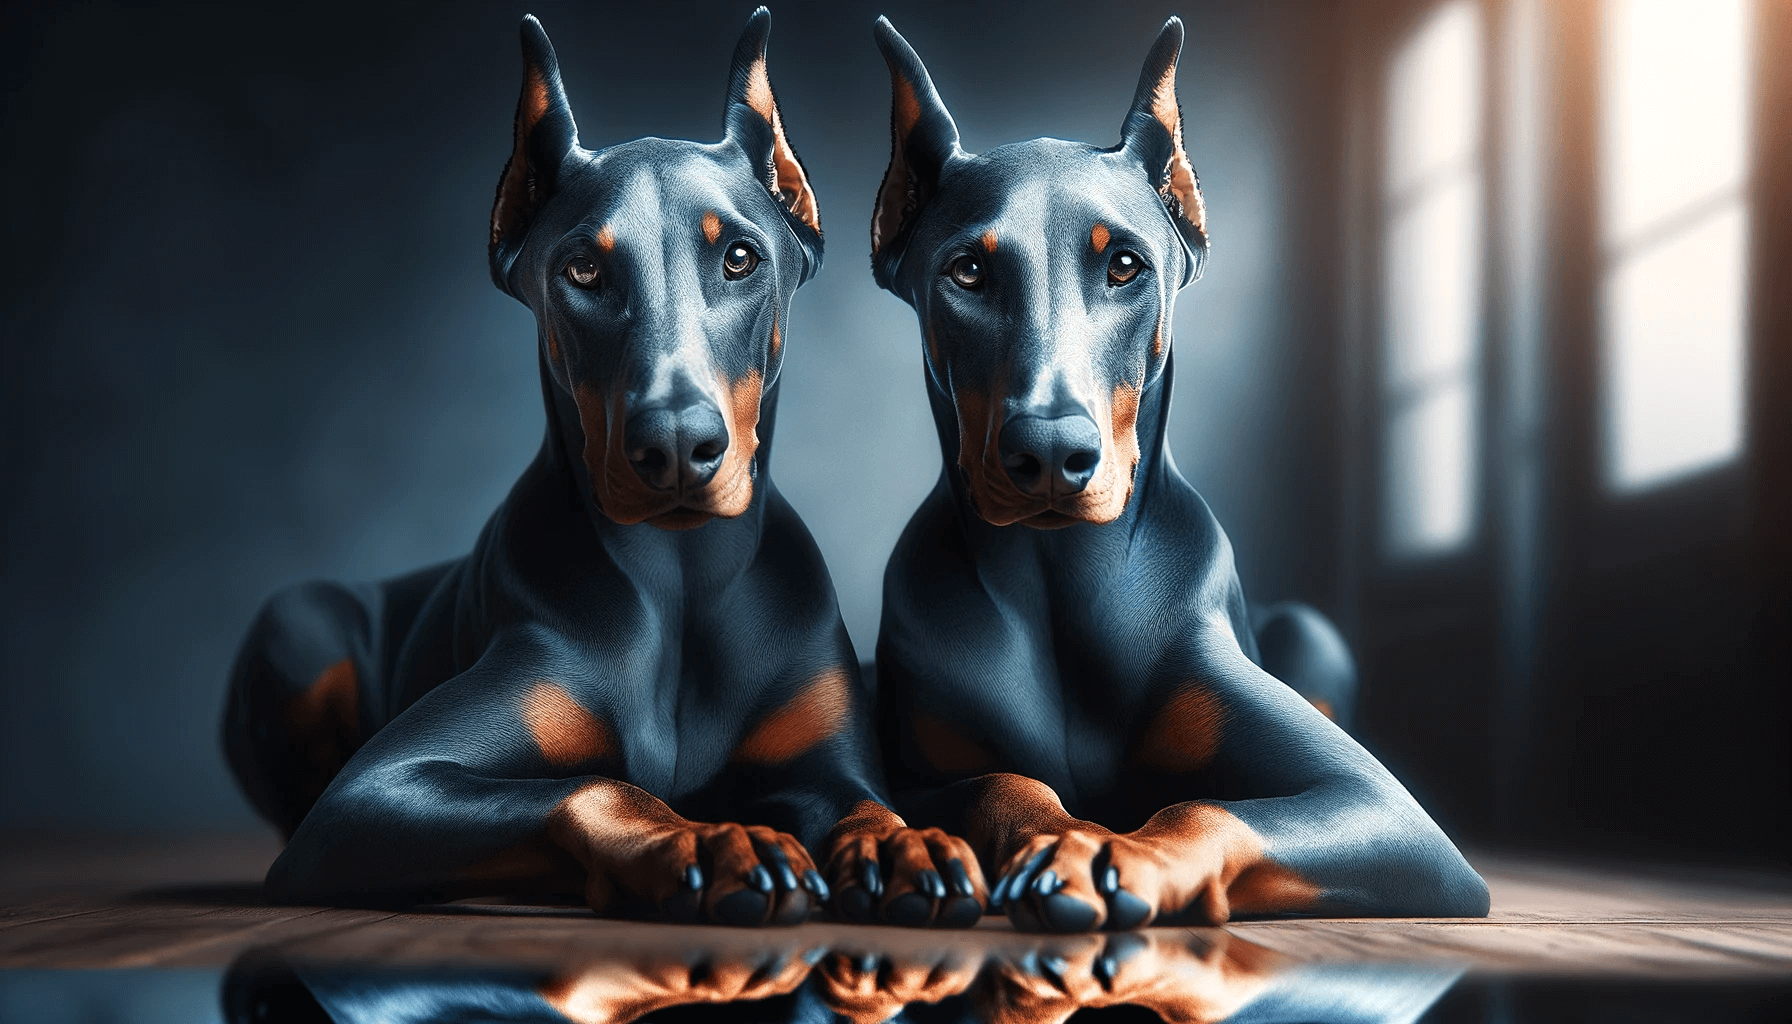 A sociable Blue Doberman with a reflection, indicating the breed's sociable nature when properly socialized.